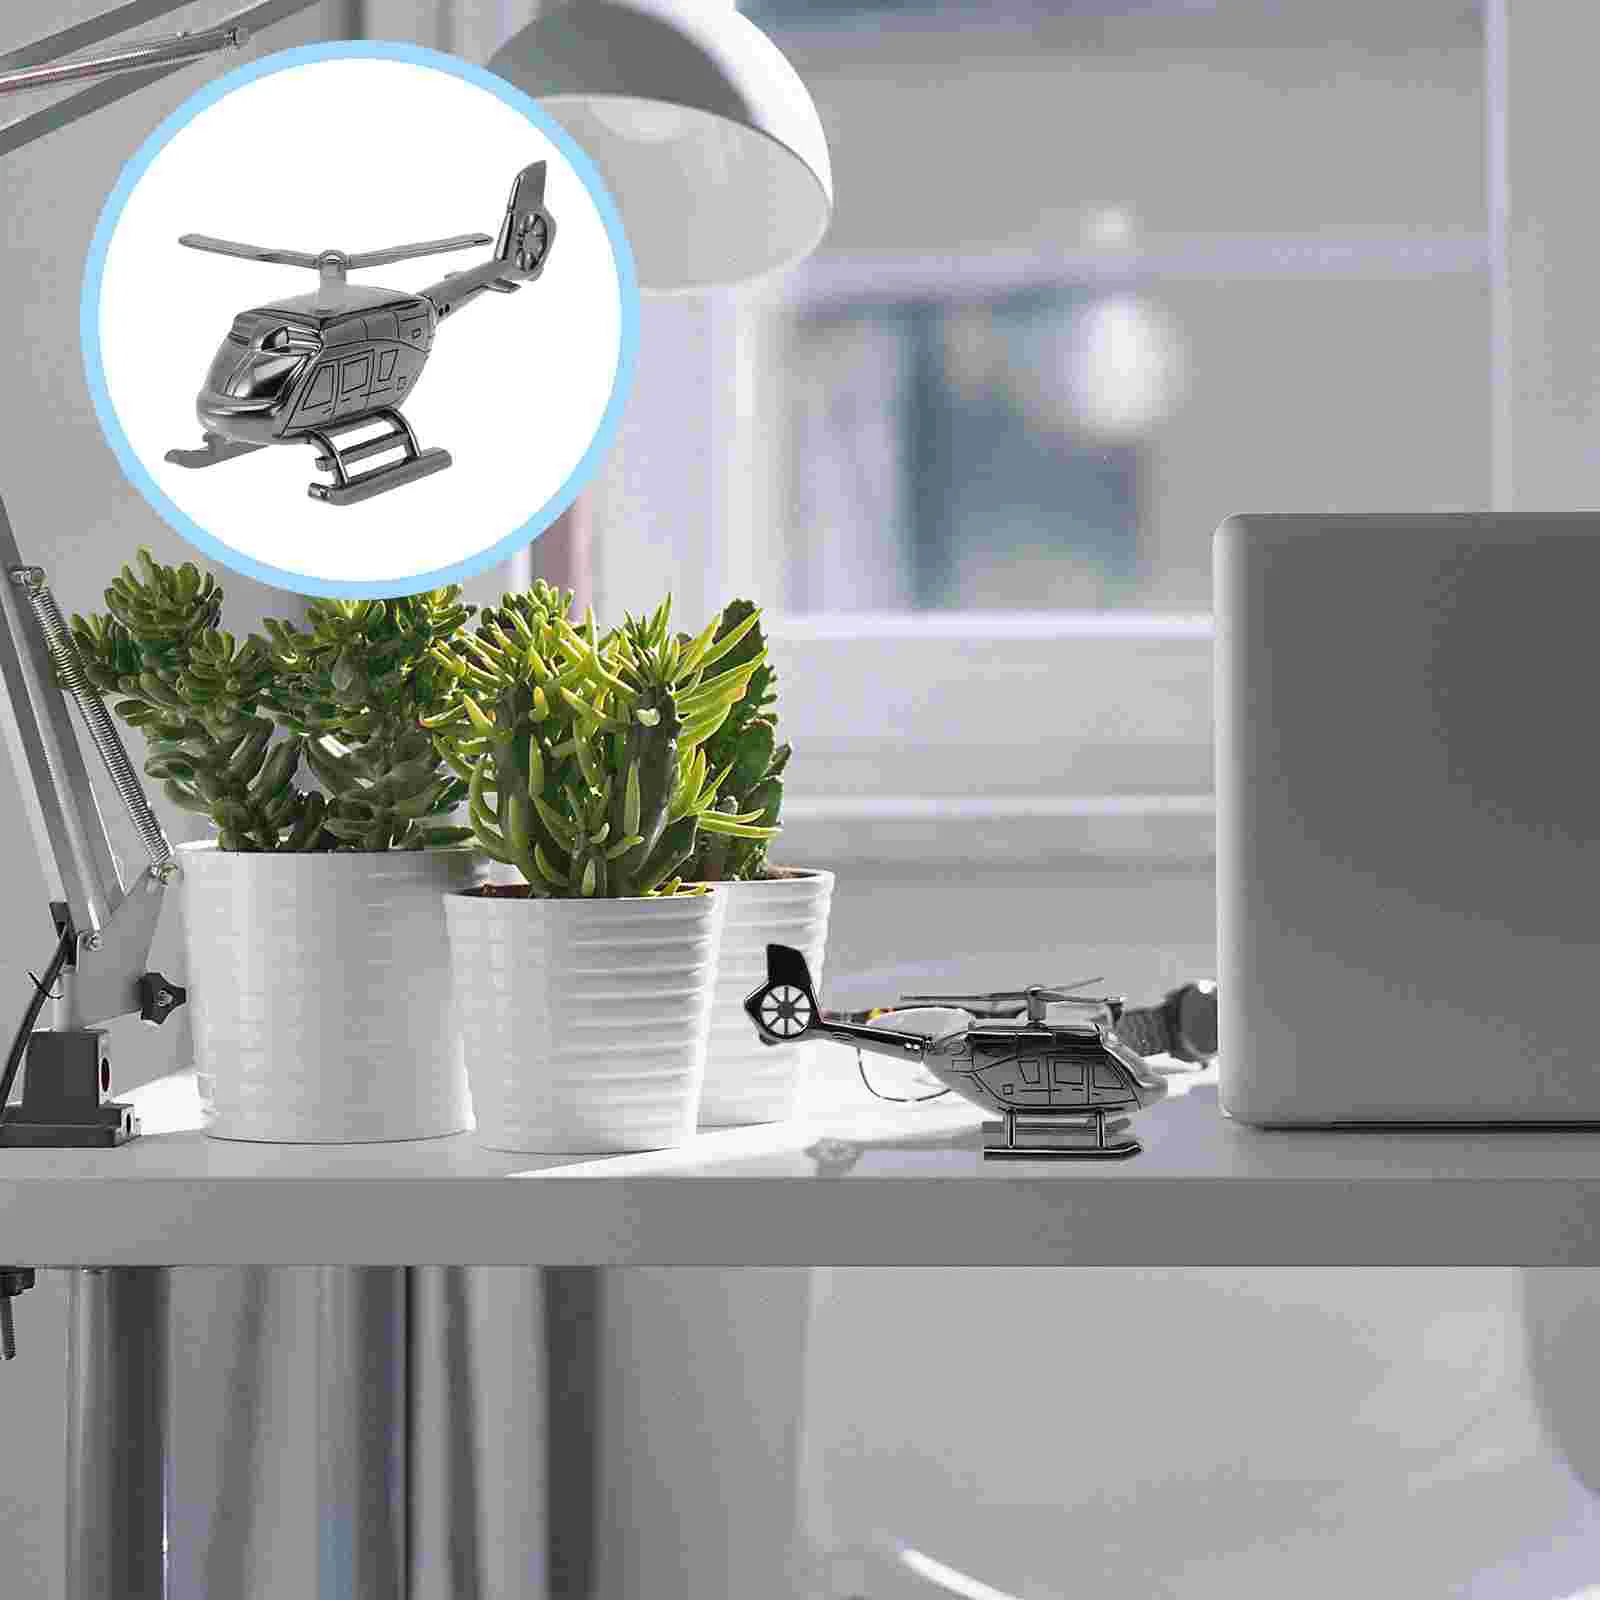 

Car Diffuser Aromatherapy Scent Helicopter Decorations Air Humidifier Oil Freshener Smell Metal Solar Dashboard Mini Usb